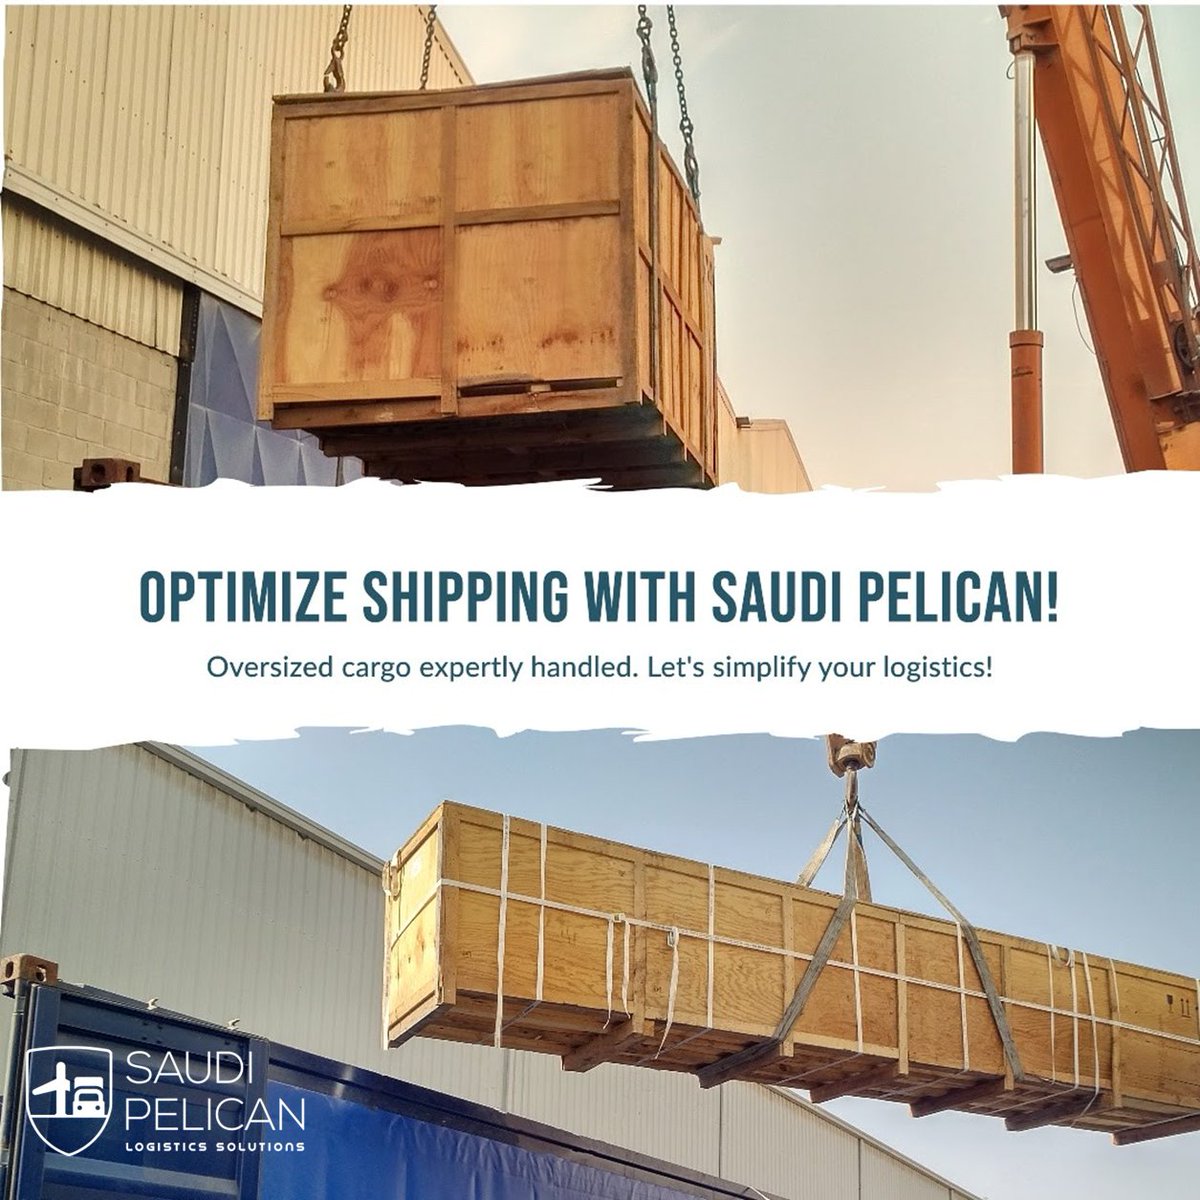 Simplify your logistics with Saudi Pelican! From destuffing oversized cargo to seamless shipping solutions, we're your trusted partner every step of the way. Let's optimize your shipping experience today!

Contact us: info@saudipelican.com

#SaudiPelican #Logistics #Seafreight